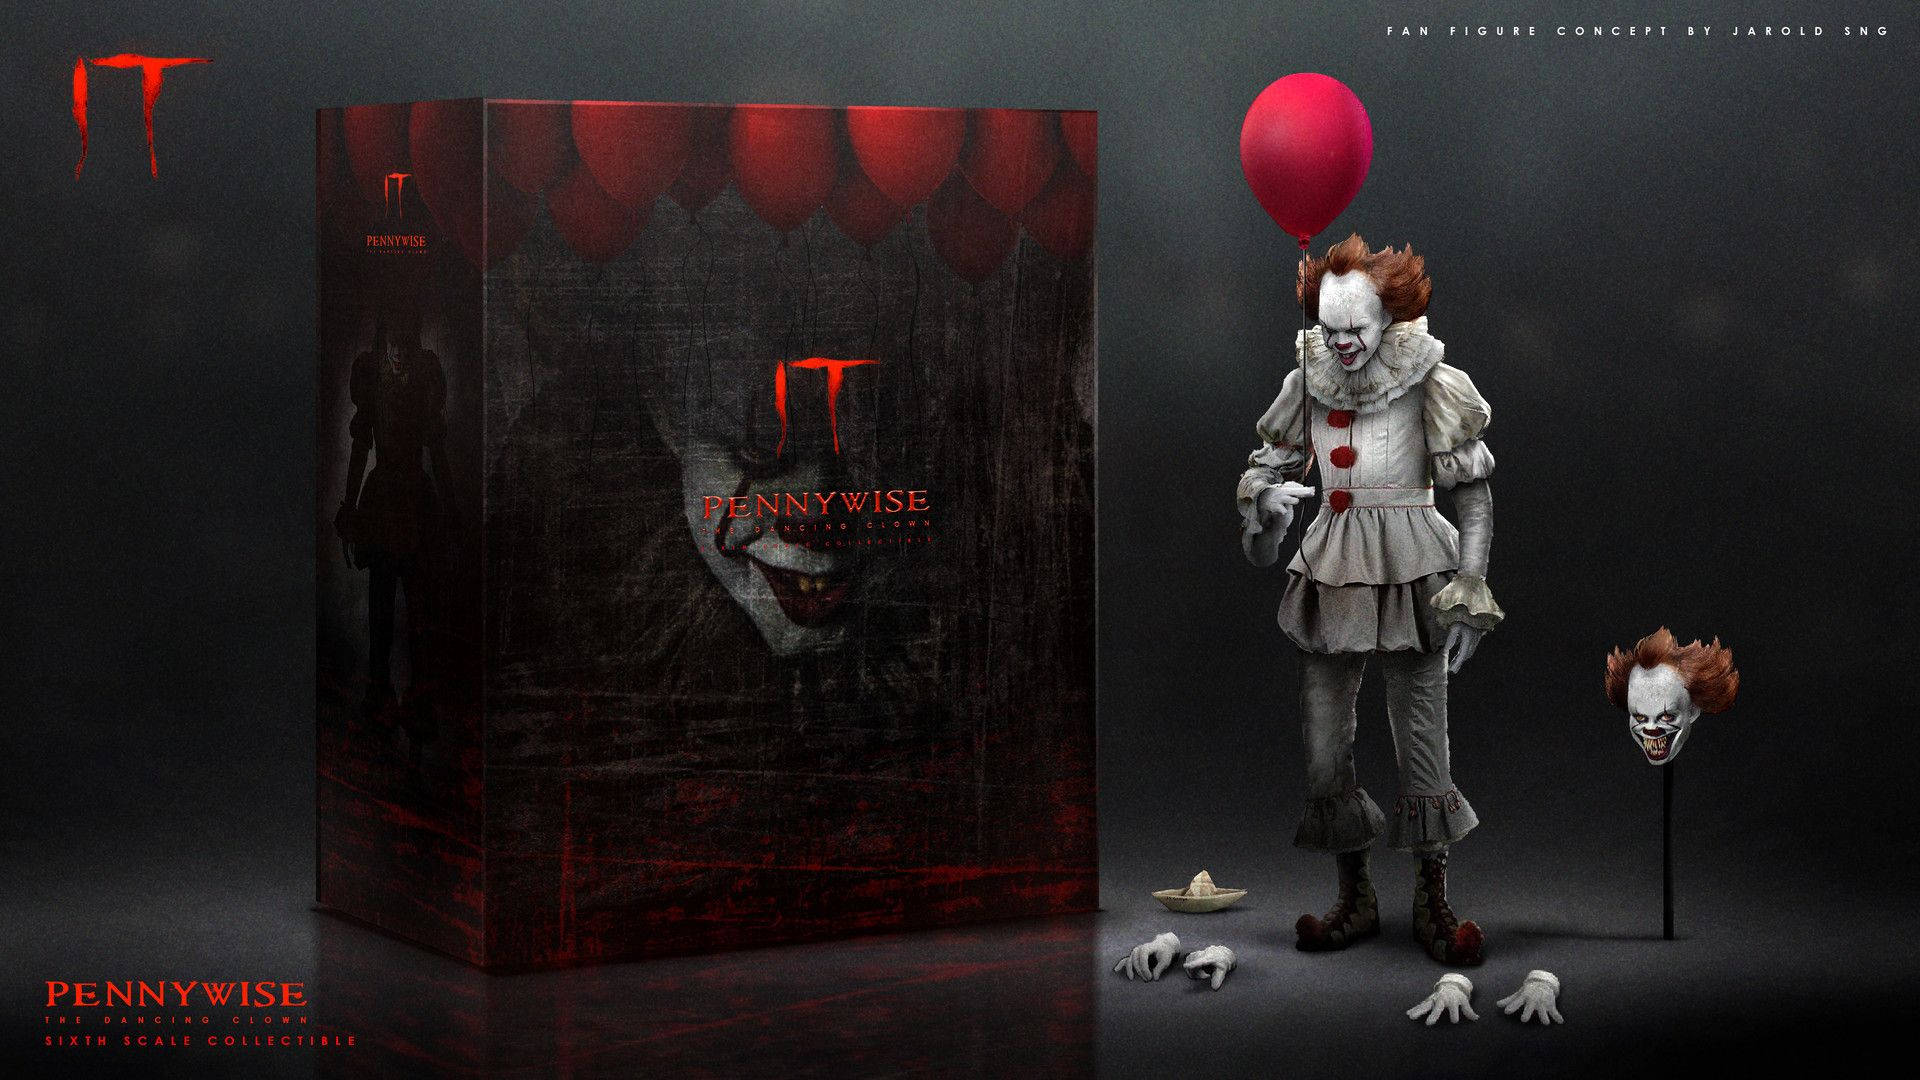 Hd Pennywise Figurine Background